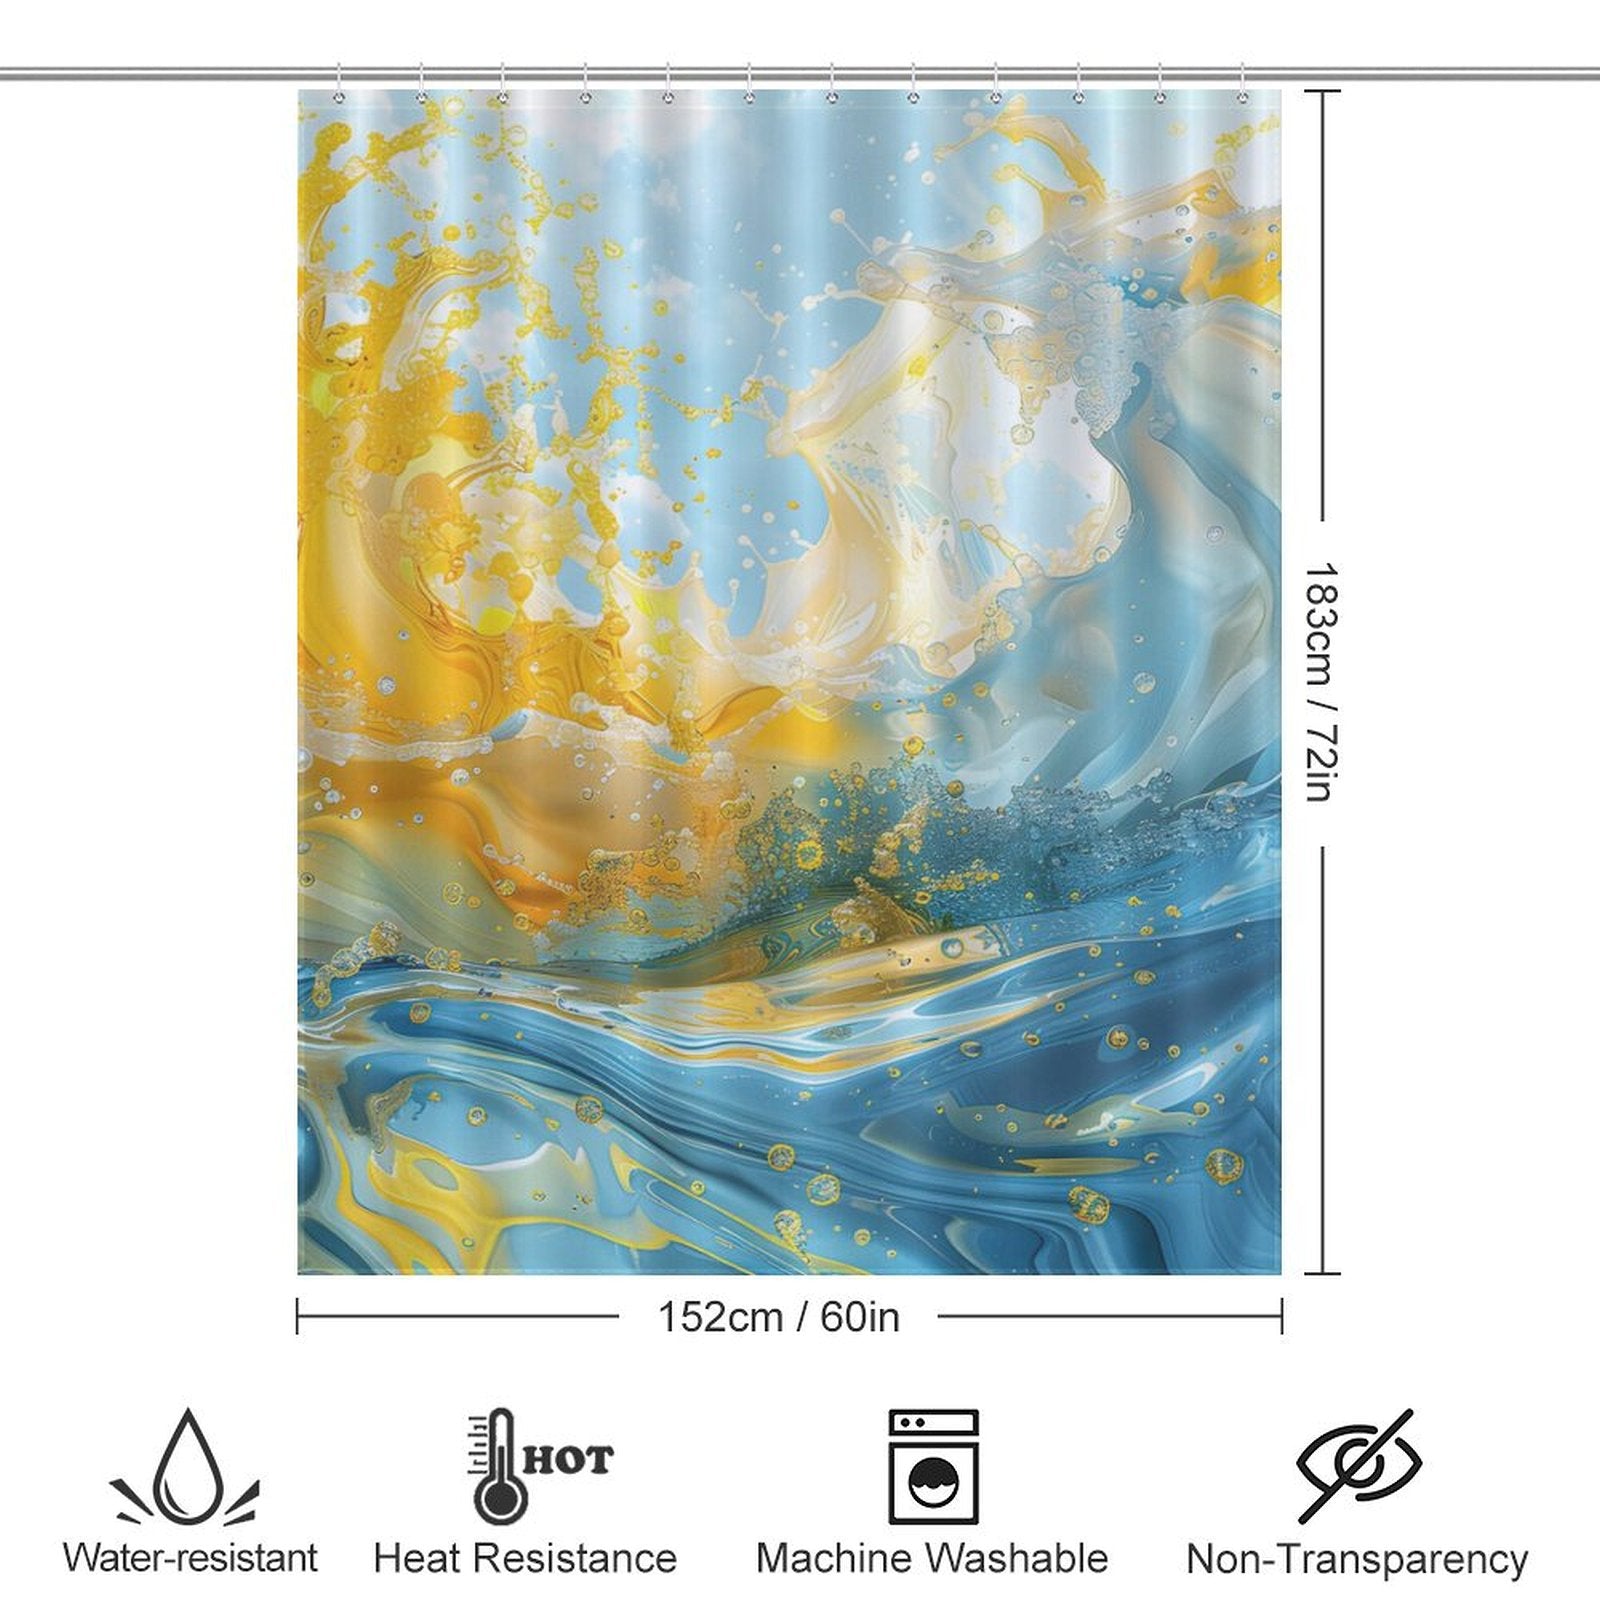 This watercolor bathroom decor features the Abstract Yellow and Blue Wave Ocean Watercolor Shower Curtain-Cottoncat by Cotton Cat, measuring 183 cm by 152 cm. It is water-resistant, heat-resistant, machine washable, and non-transparent.